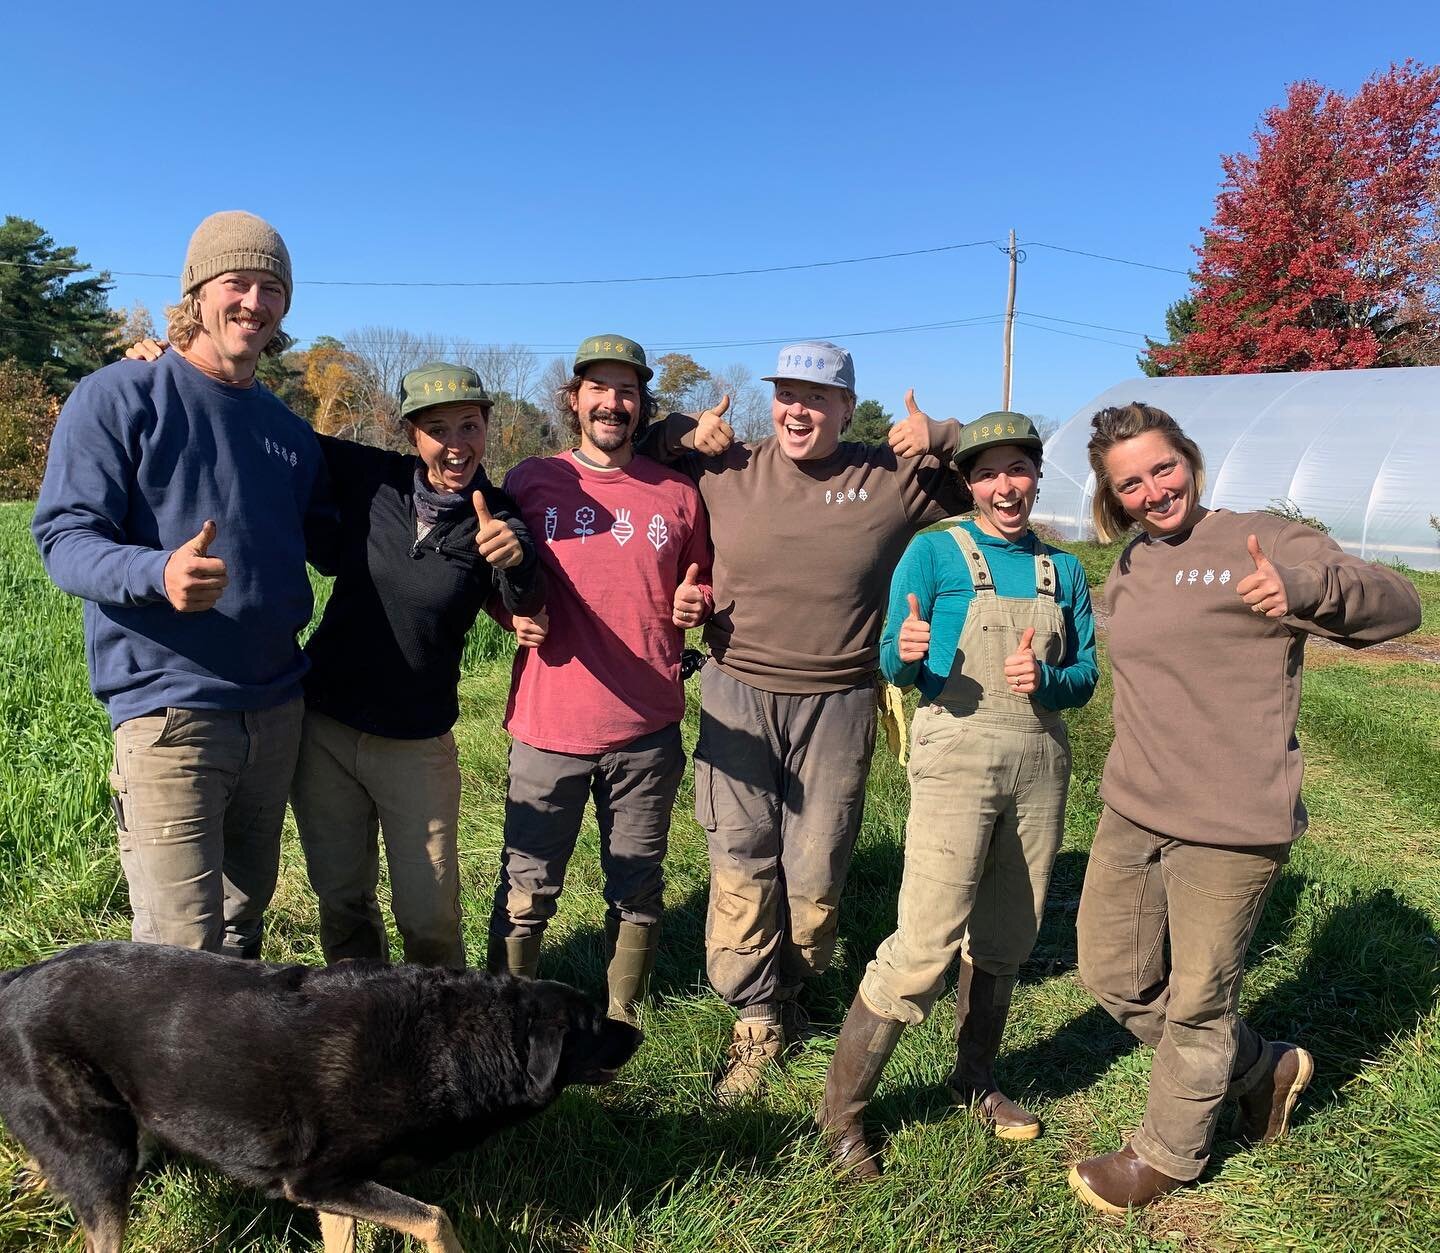 New fall merch is here! We&rsquo;ve got cozy crewneck sweatshirts and long sleeve tees, 5-panel hats and cute baby onesies just in from our local printer. And what better models than our farm crew just out of the fields after a morning harvesting veg